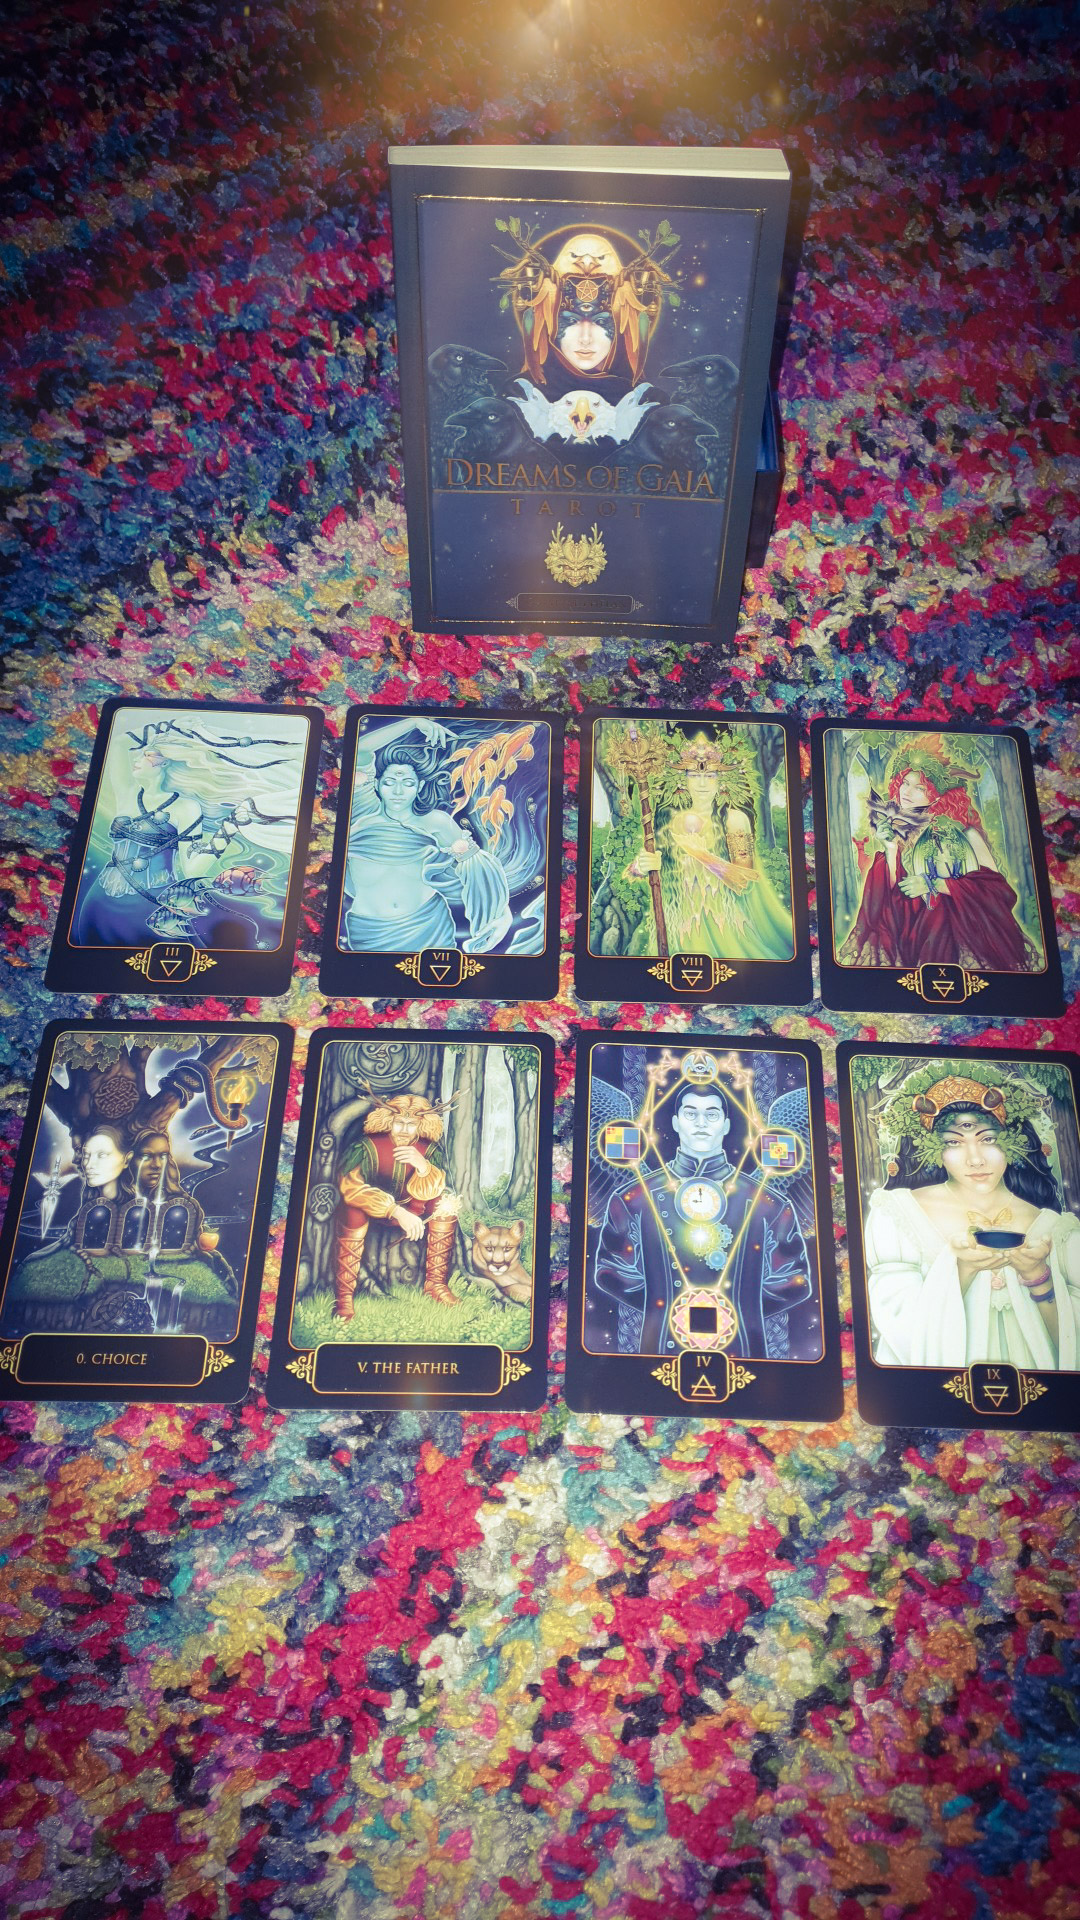 Oracle card/ intuitive guidance reading